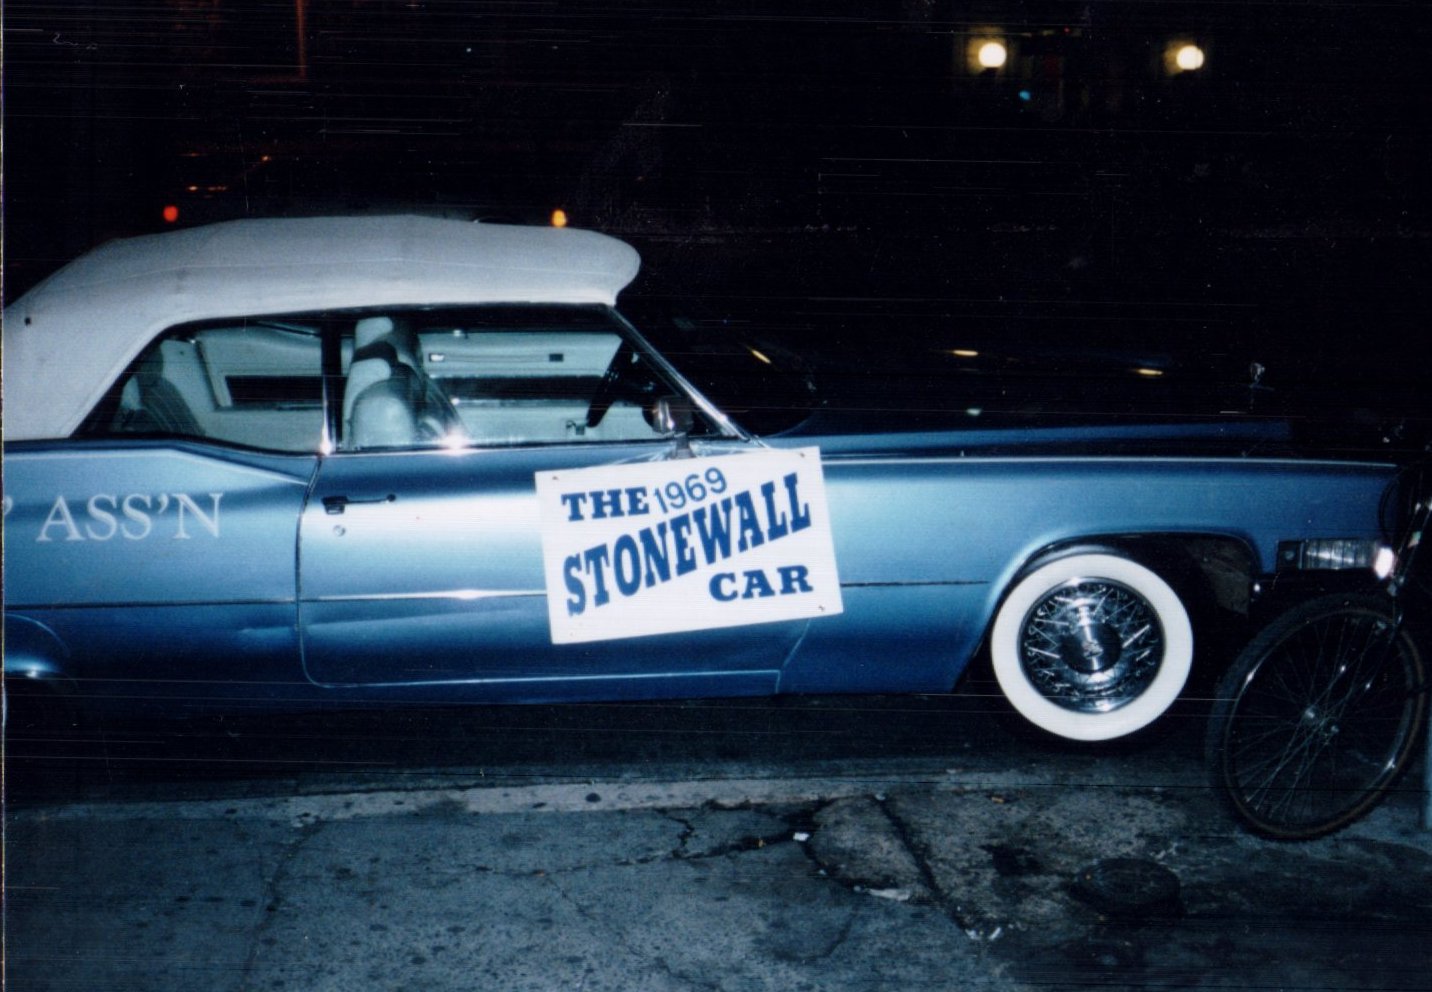 The true blue Stonewall Car at night and, from a downward angle, looking coupey